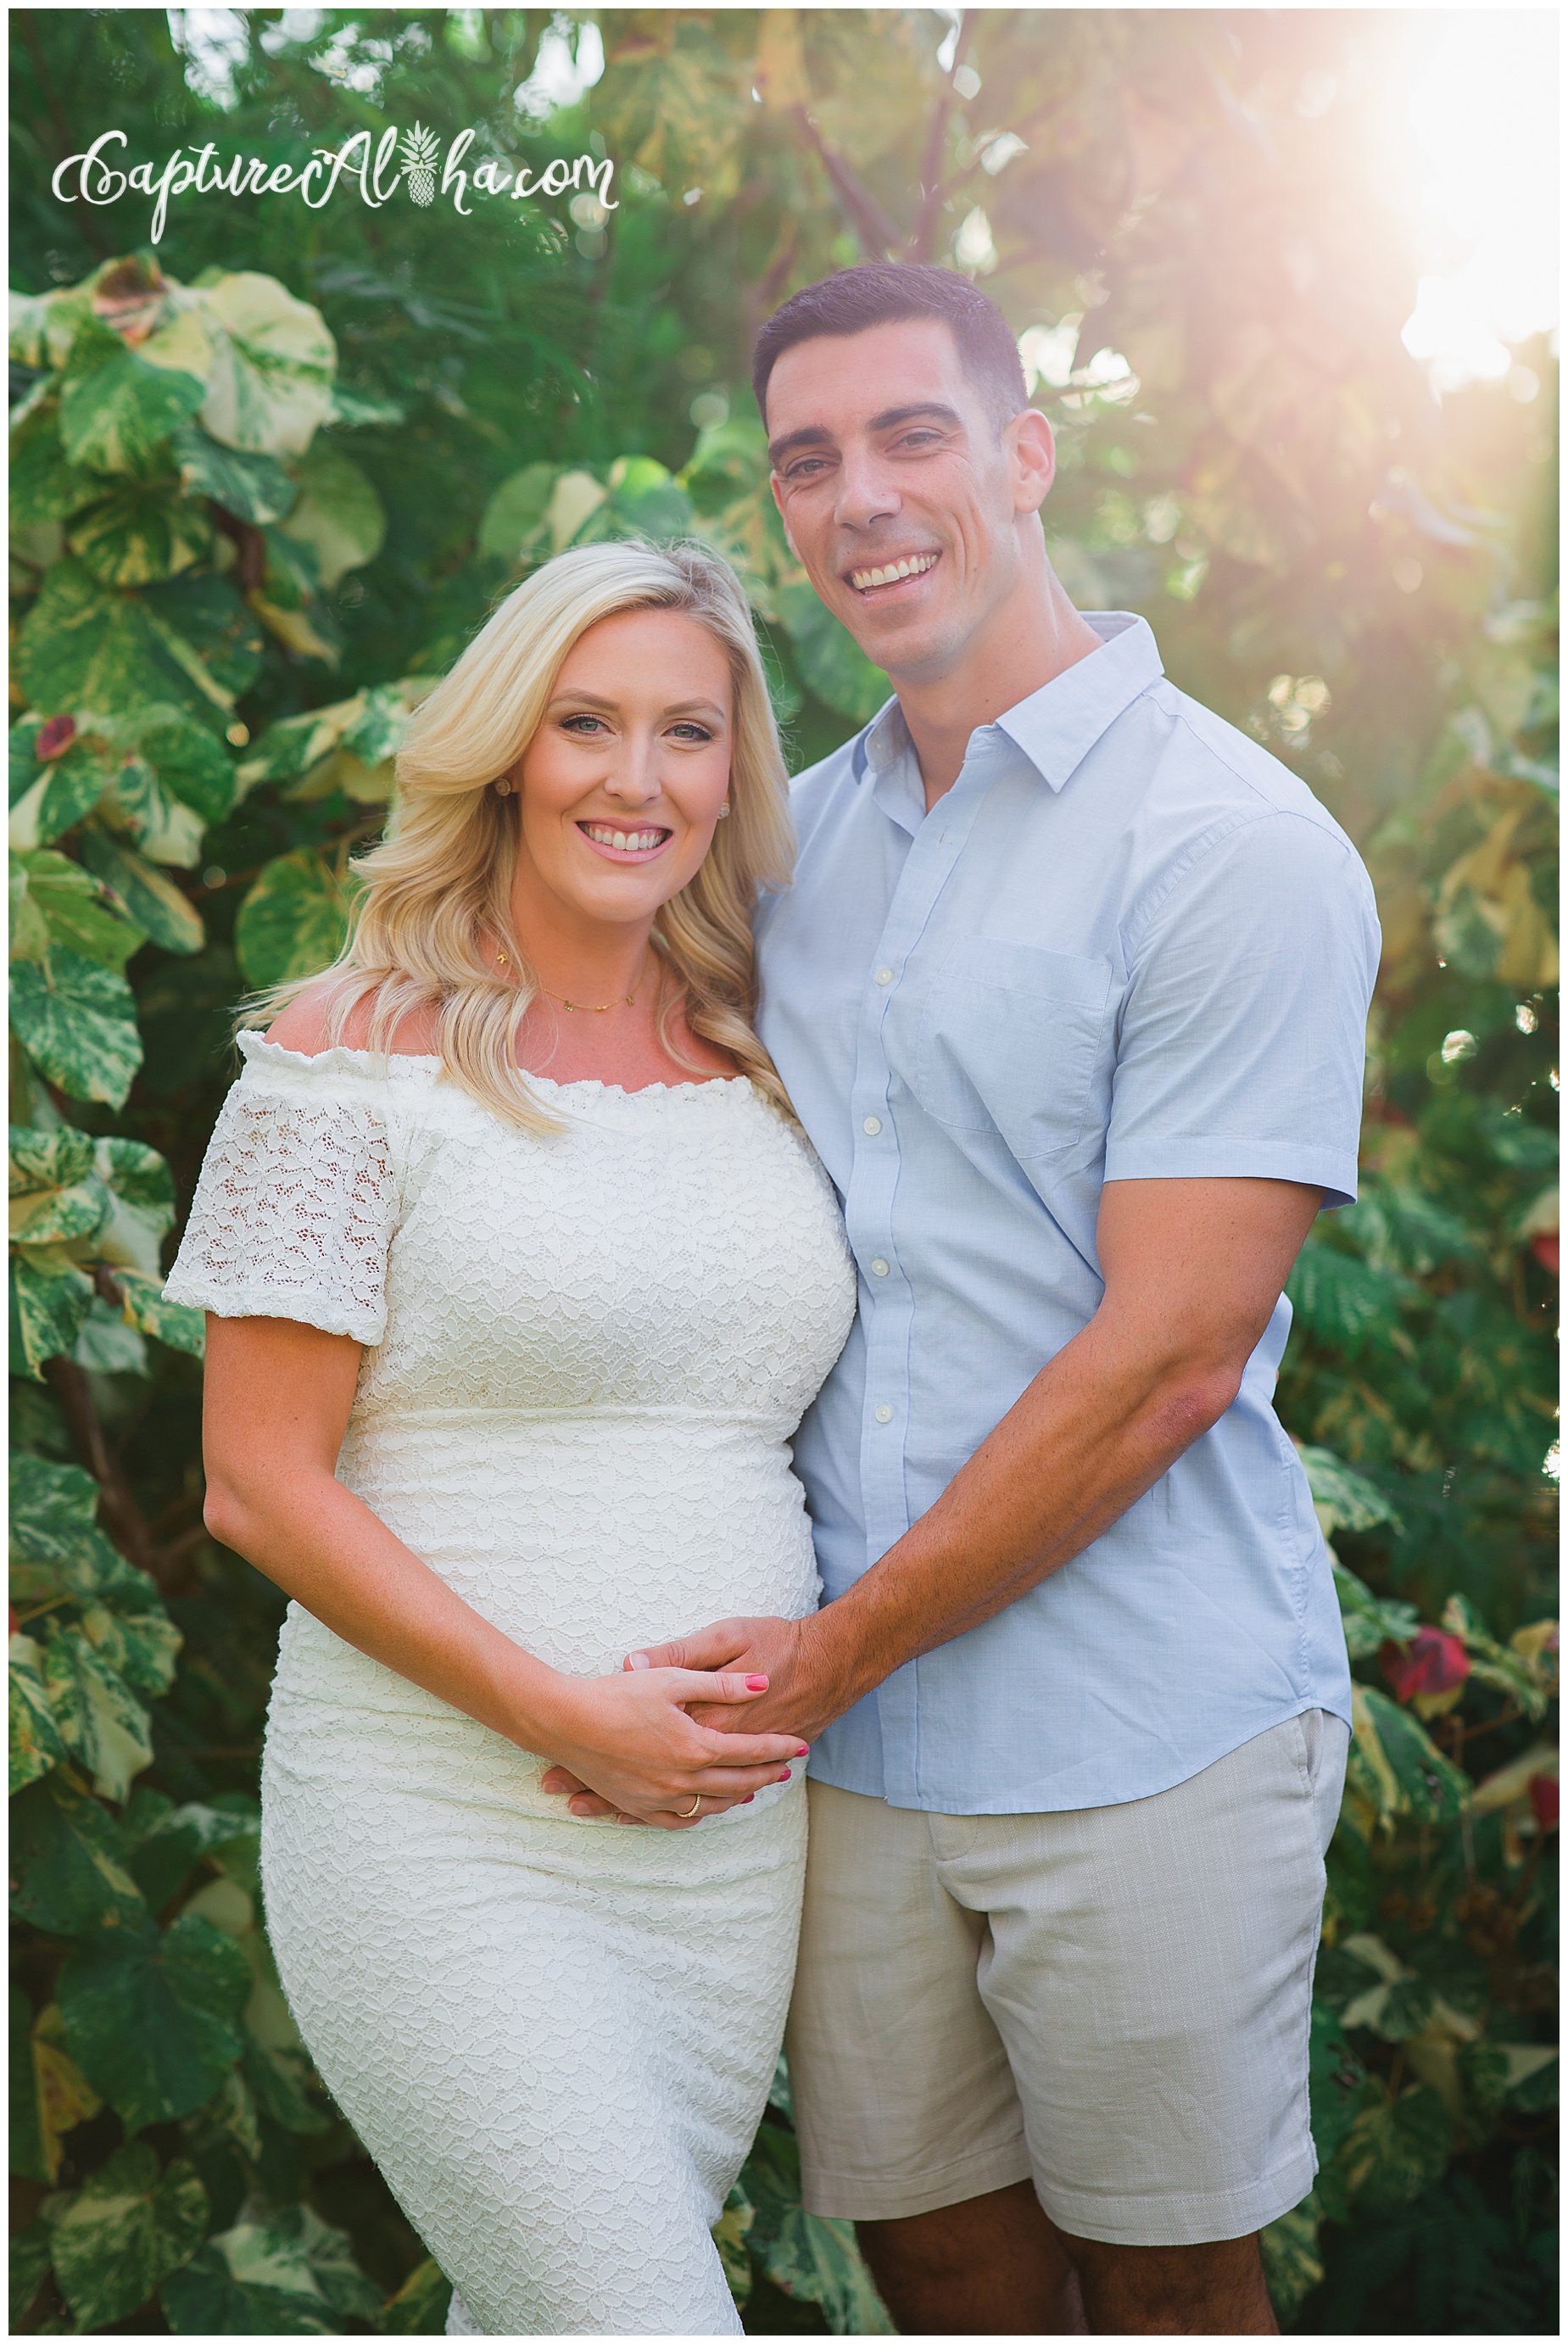 Wife and husband on a maternity photoshoot in Maui